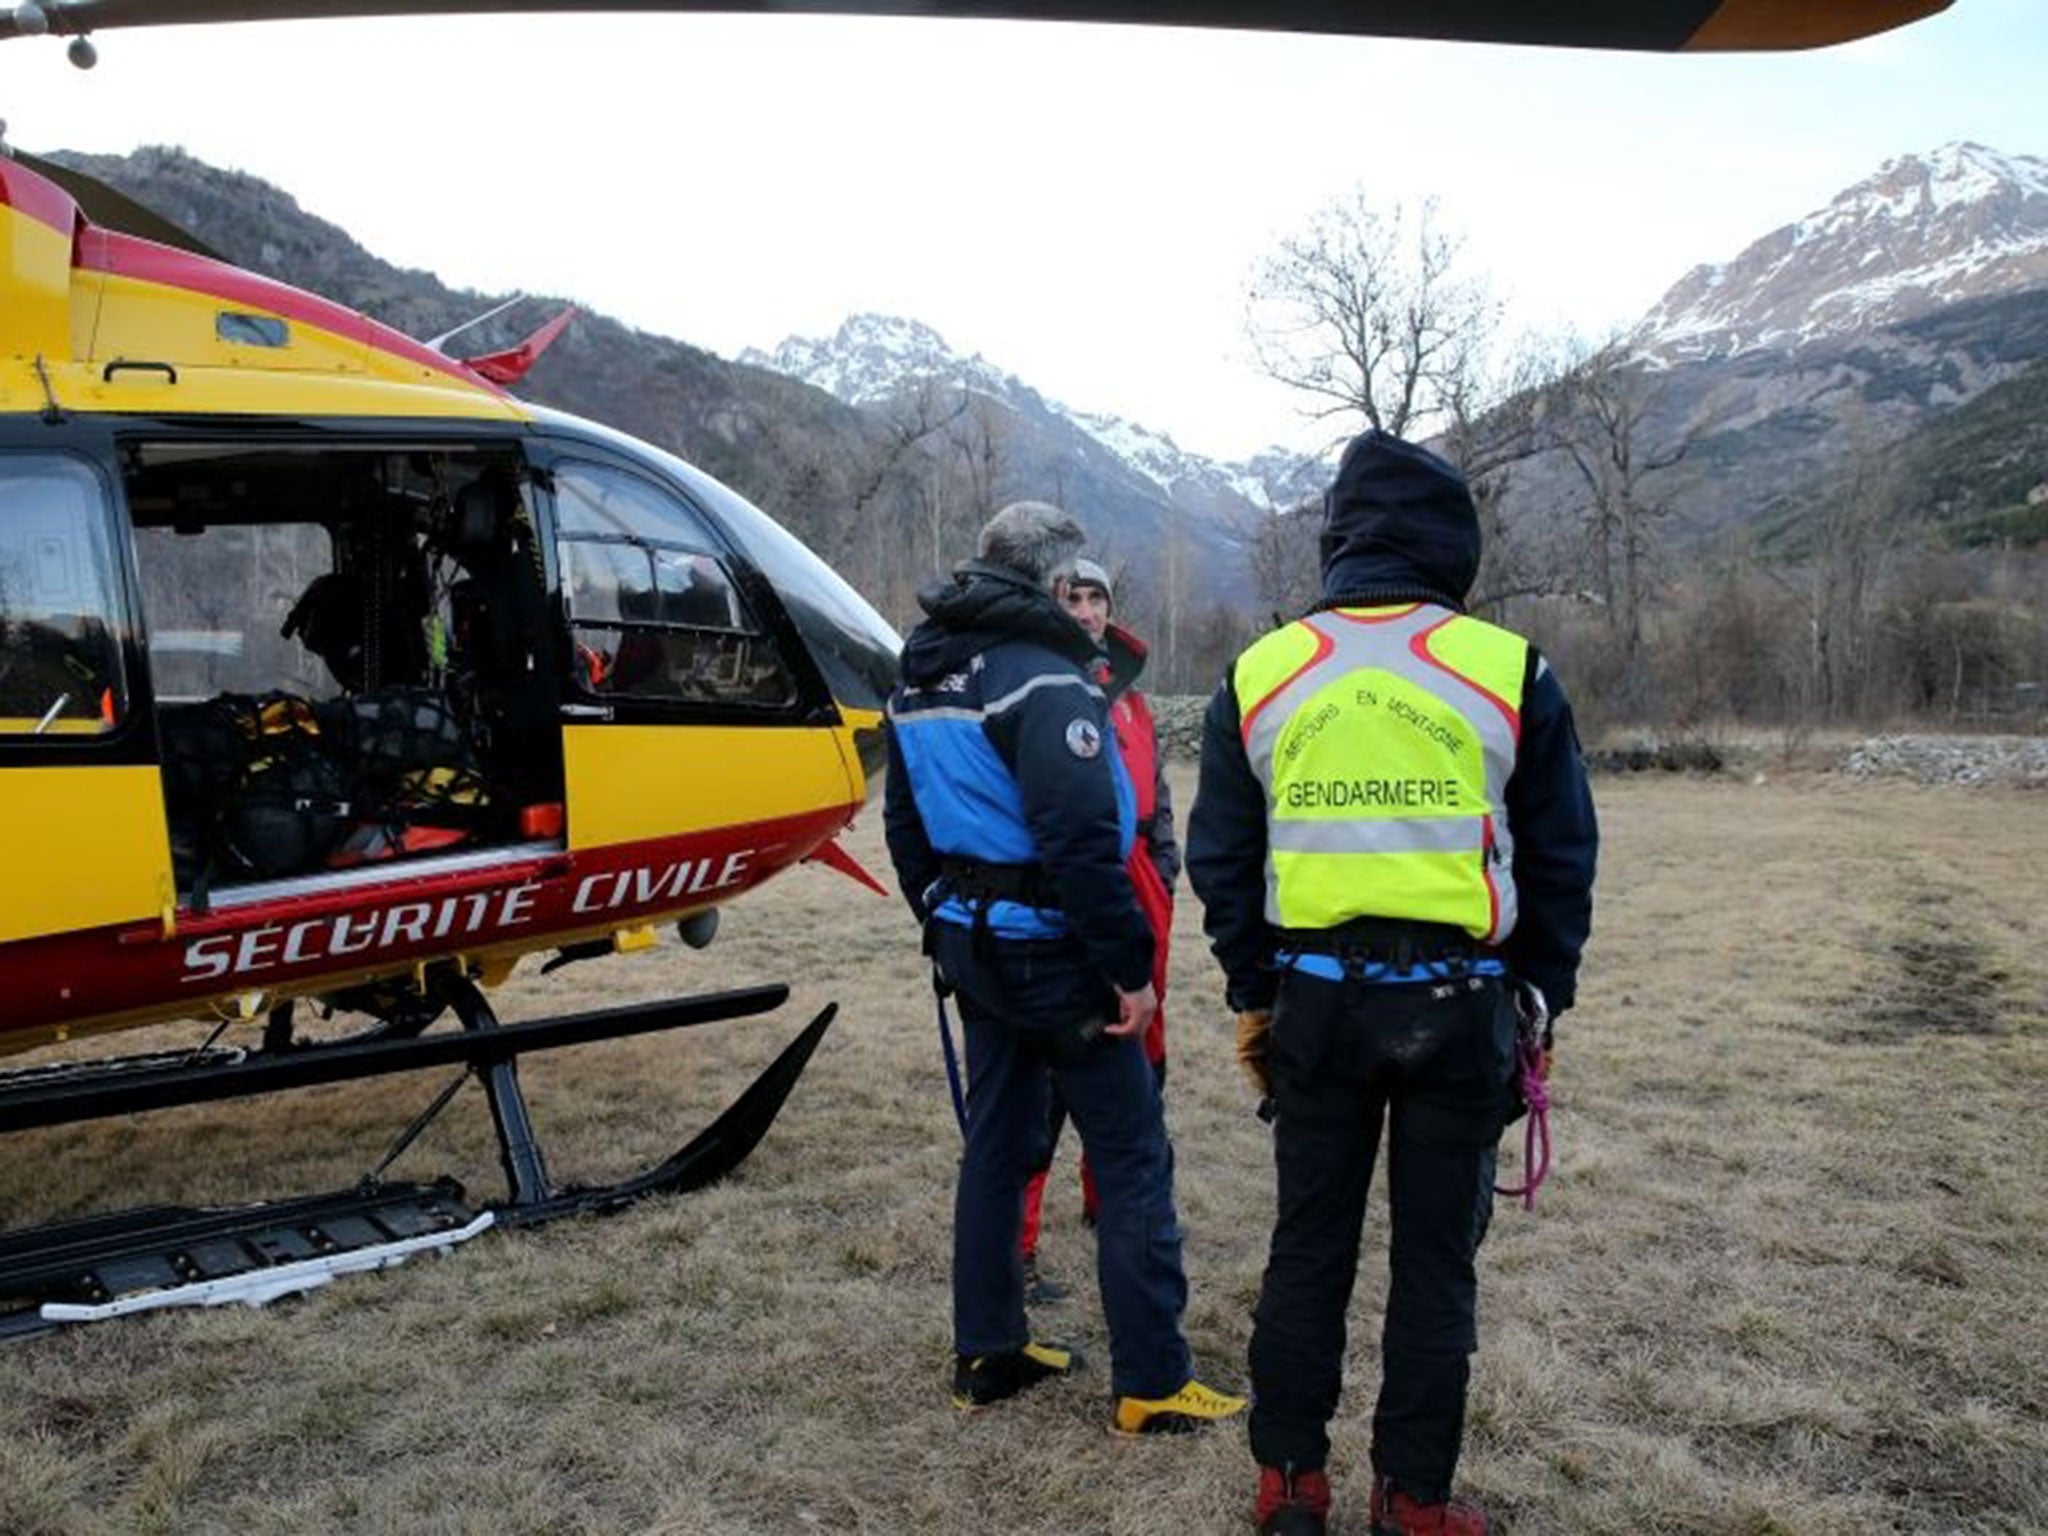 French gendarmes and rescuers stand near a helicopter on April 1, 2015 in Vallouise, in the French Alps, after searching for the victims of an avalanche which took place in the afternoon in the mountains of the Massif des Ecrins, killing three people.